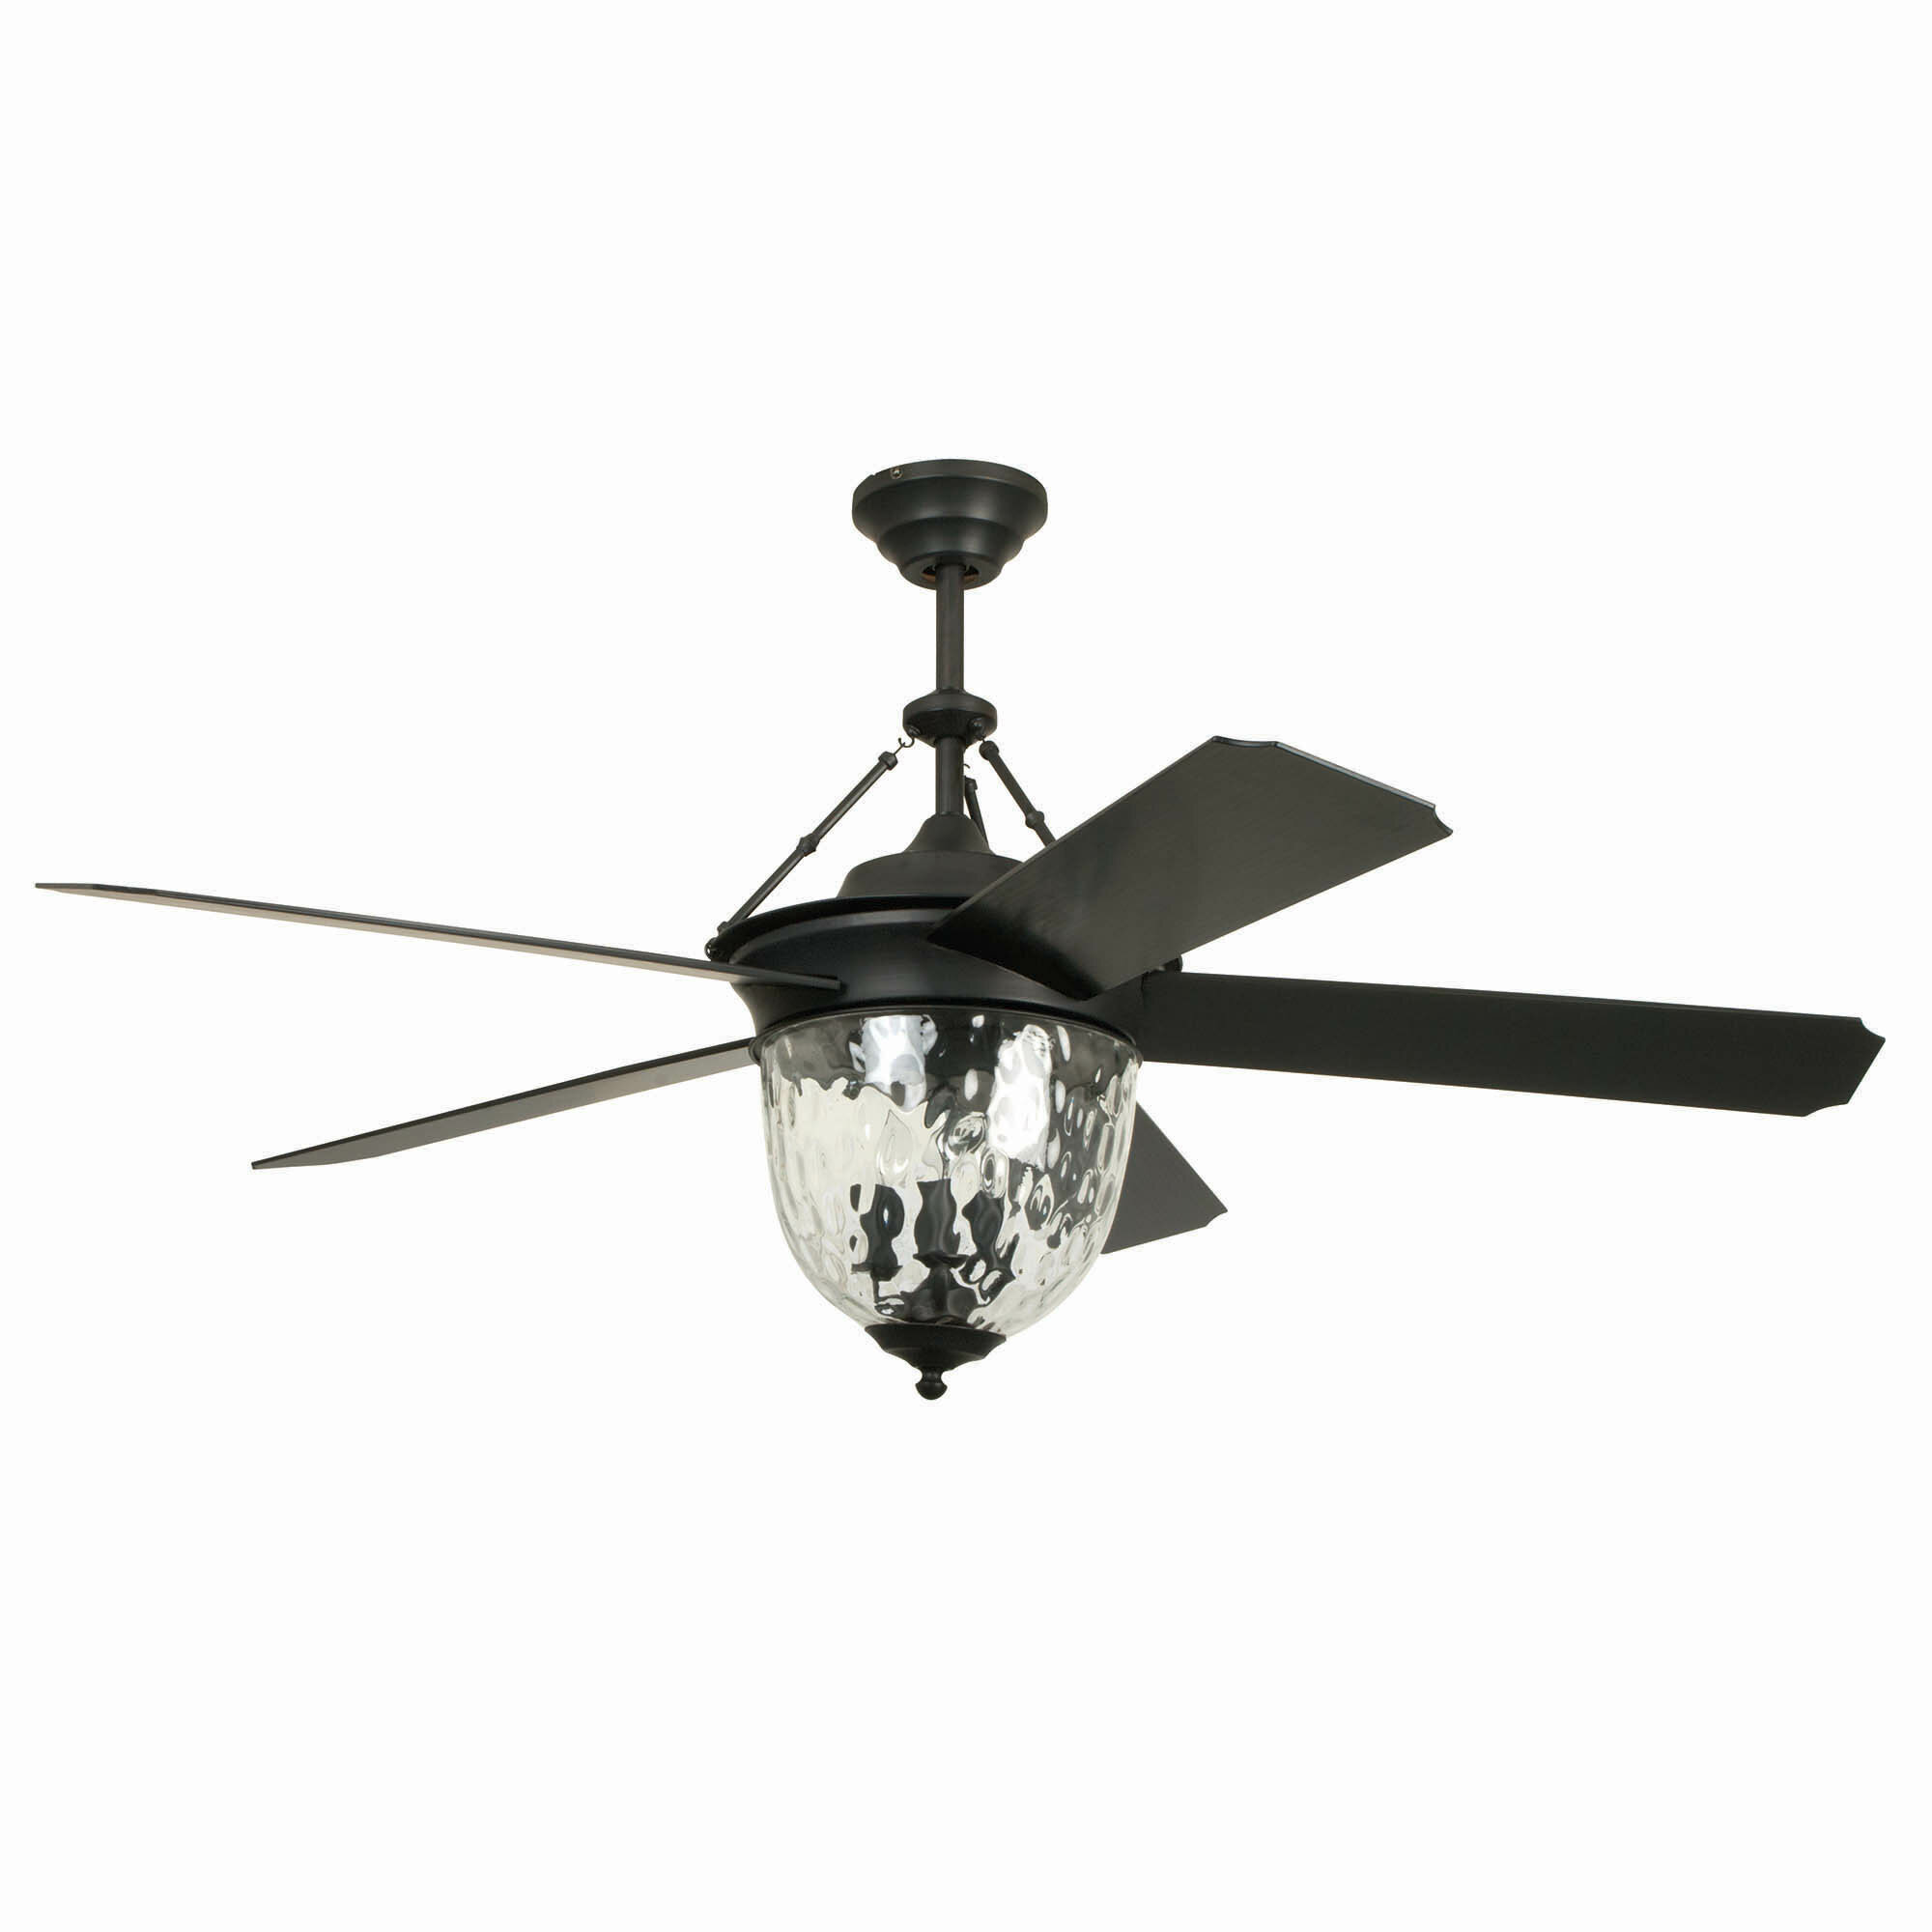 52 Harada Hangdown 5 Blade Ceiling Fan With Remote Light Kit Included